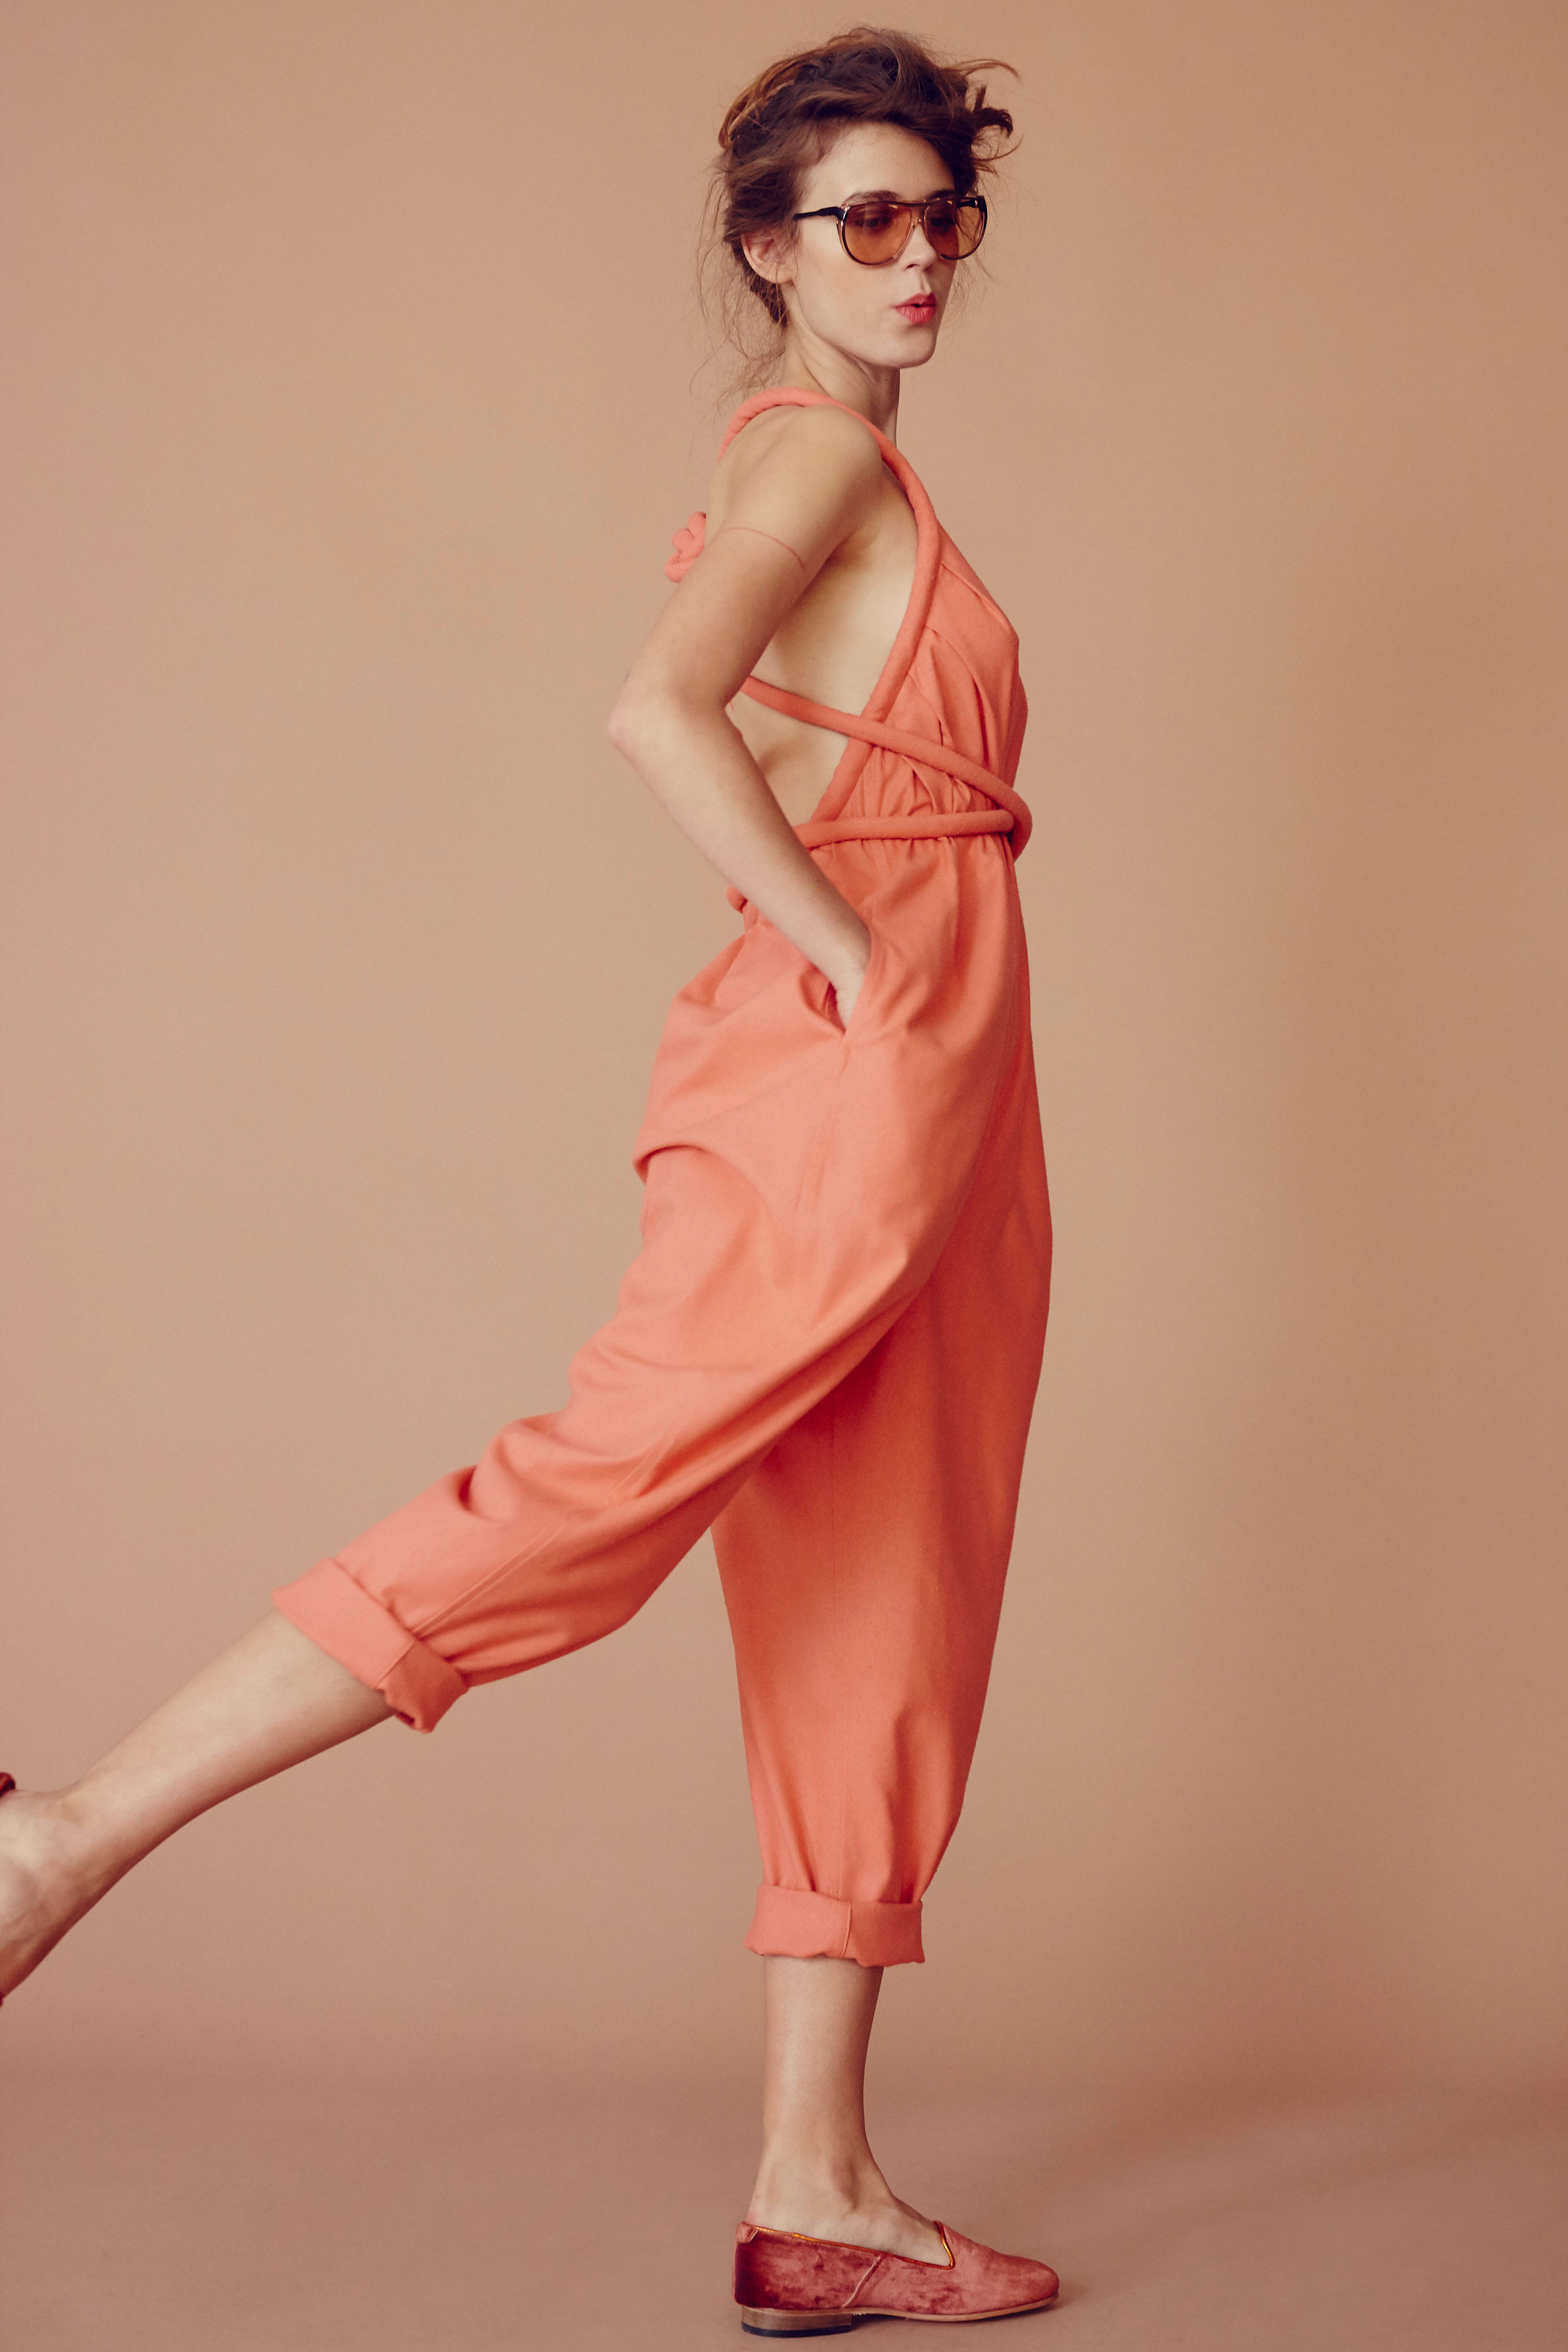 Electric Feathers SS 2016 | Fashion made in NY | Jumpsuit